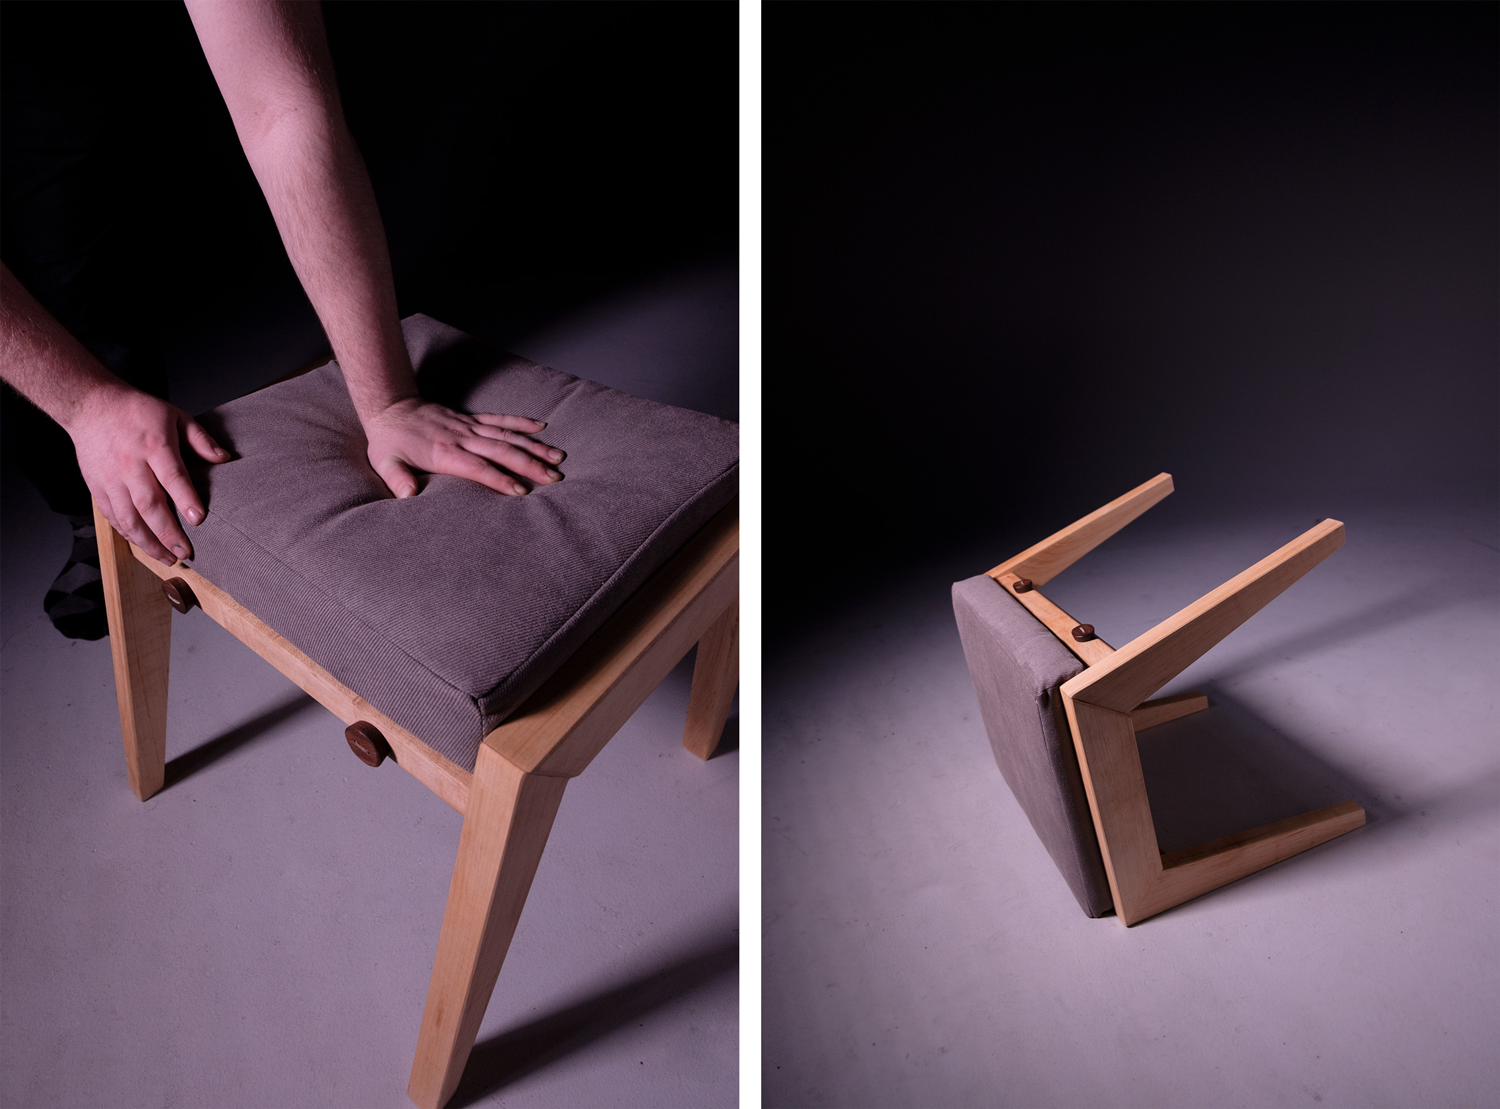 A stool from two angles, made of wood and fabric